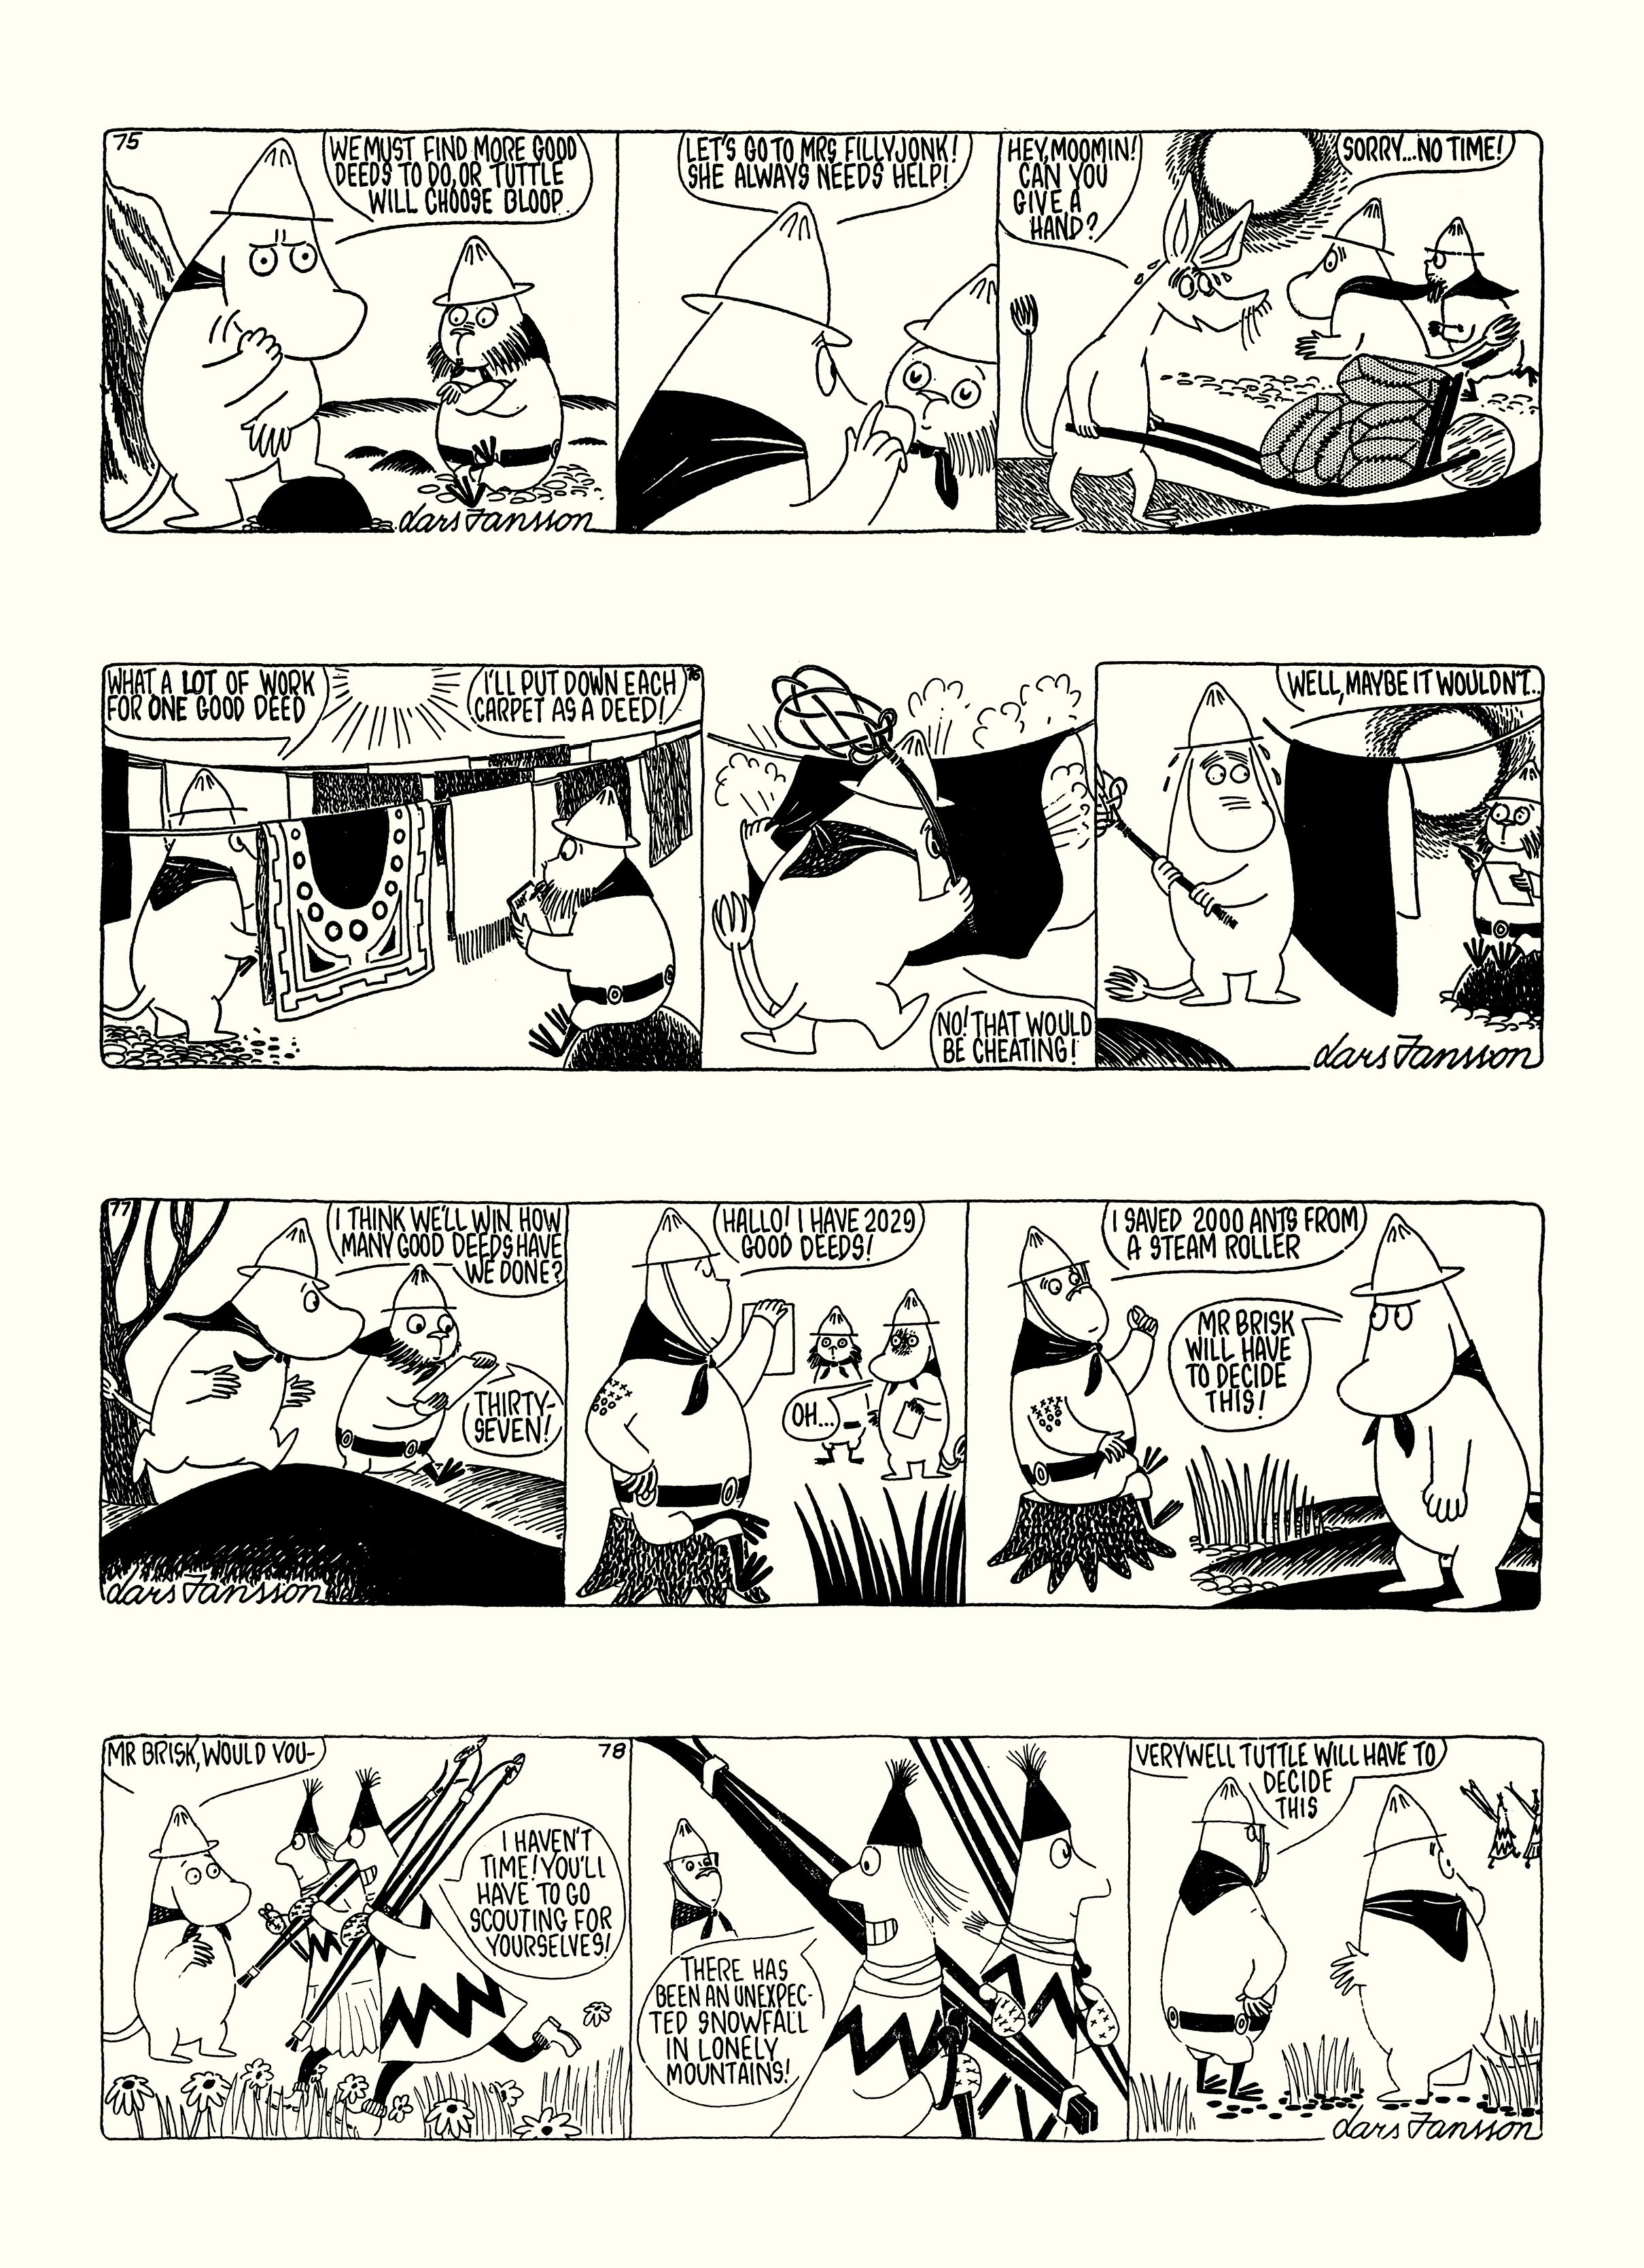 Read online Moomin: The Complete Lars Jansson Comic Strip comic -  Issue # TPB 7 - 46